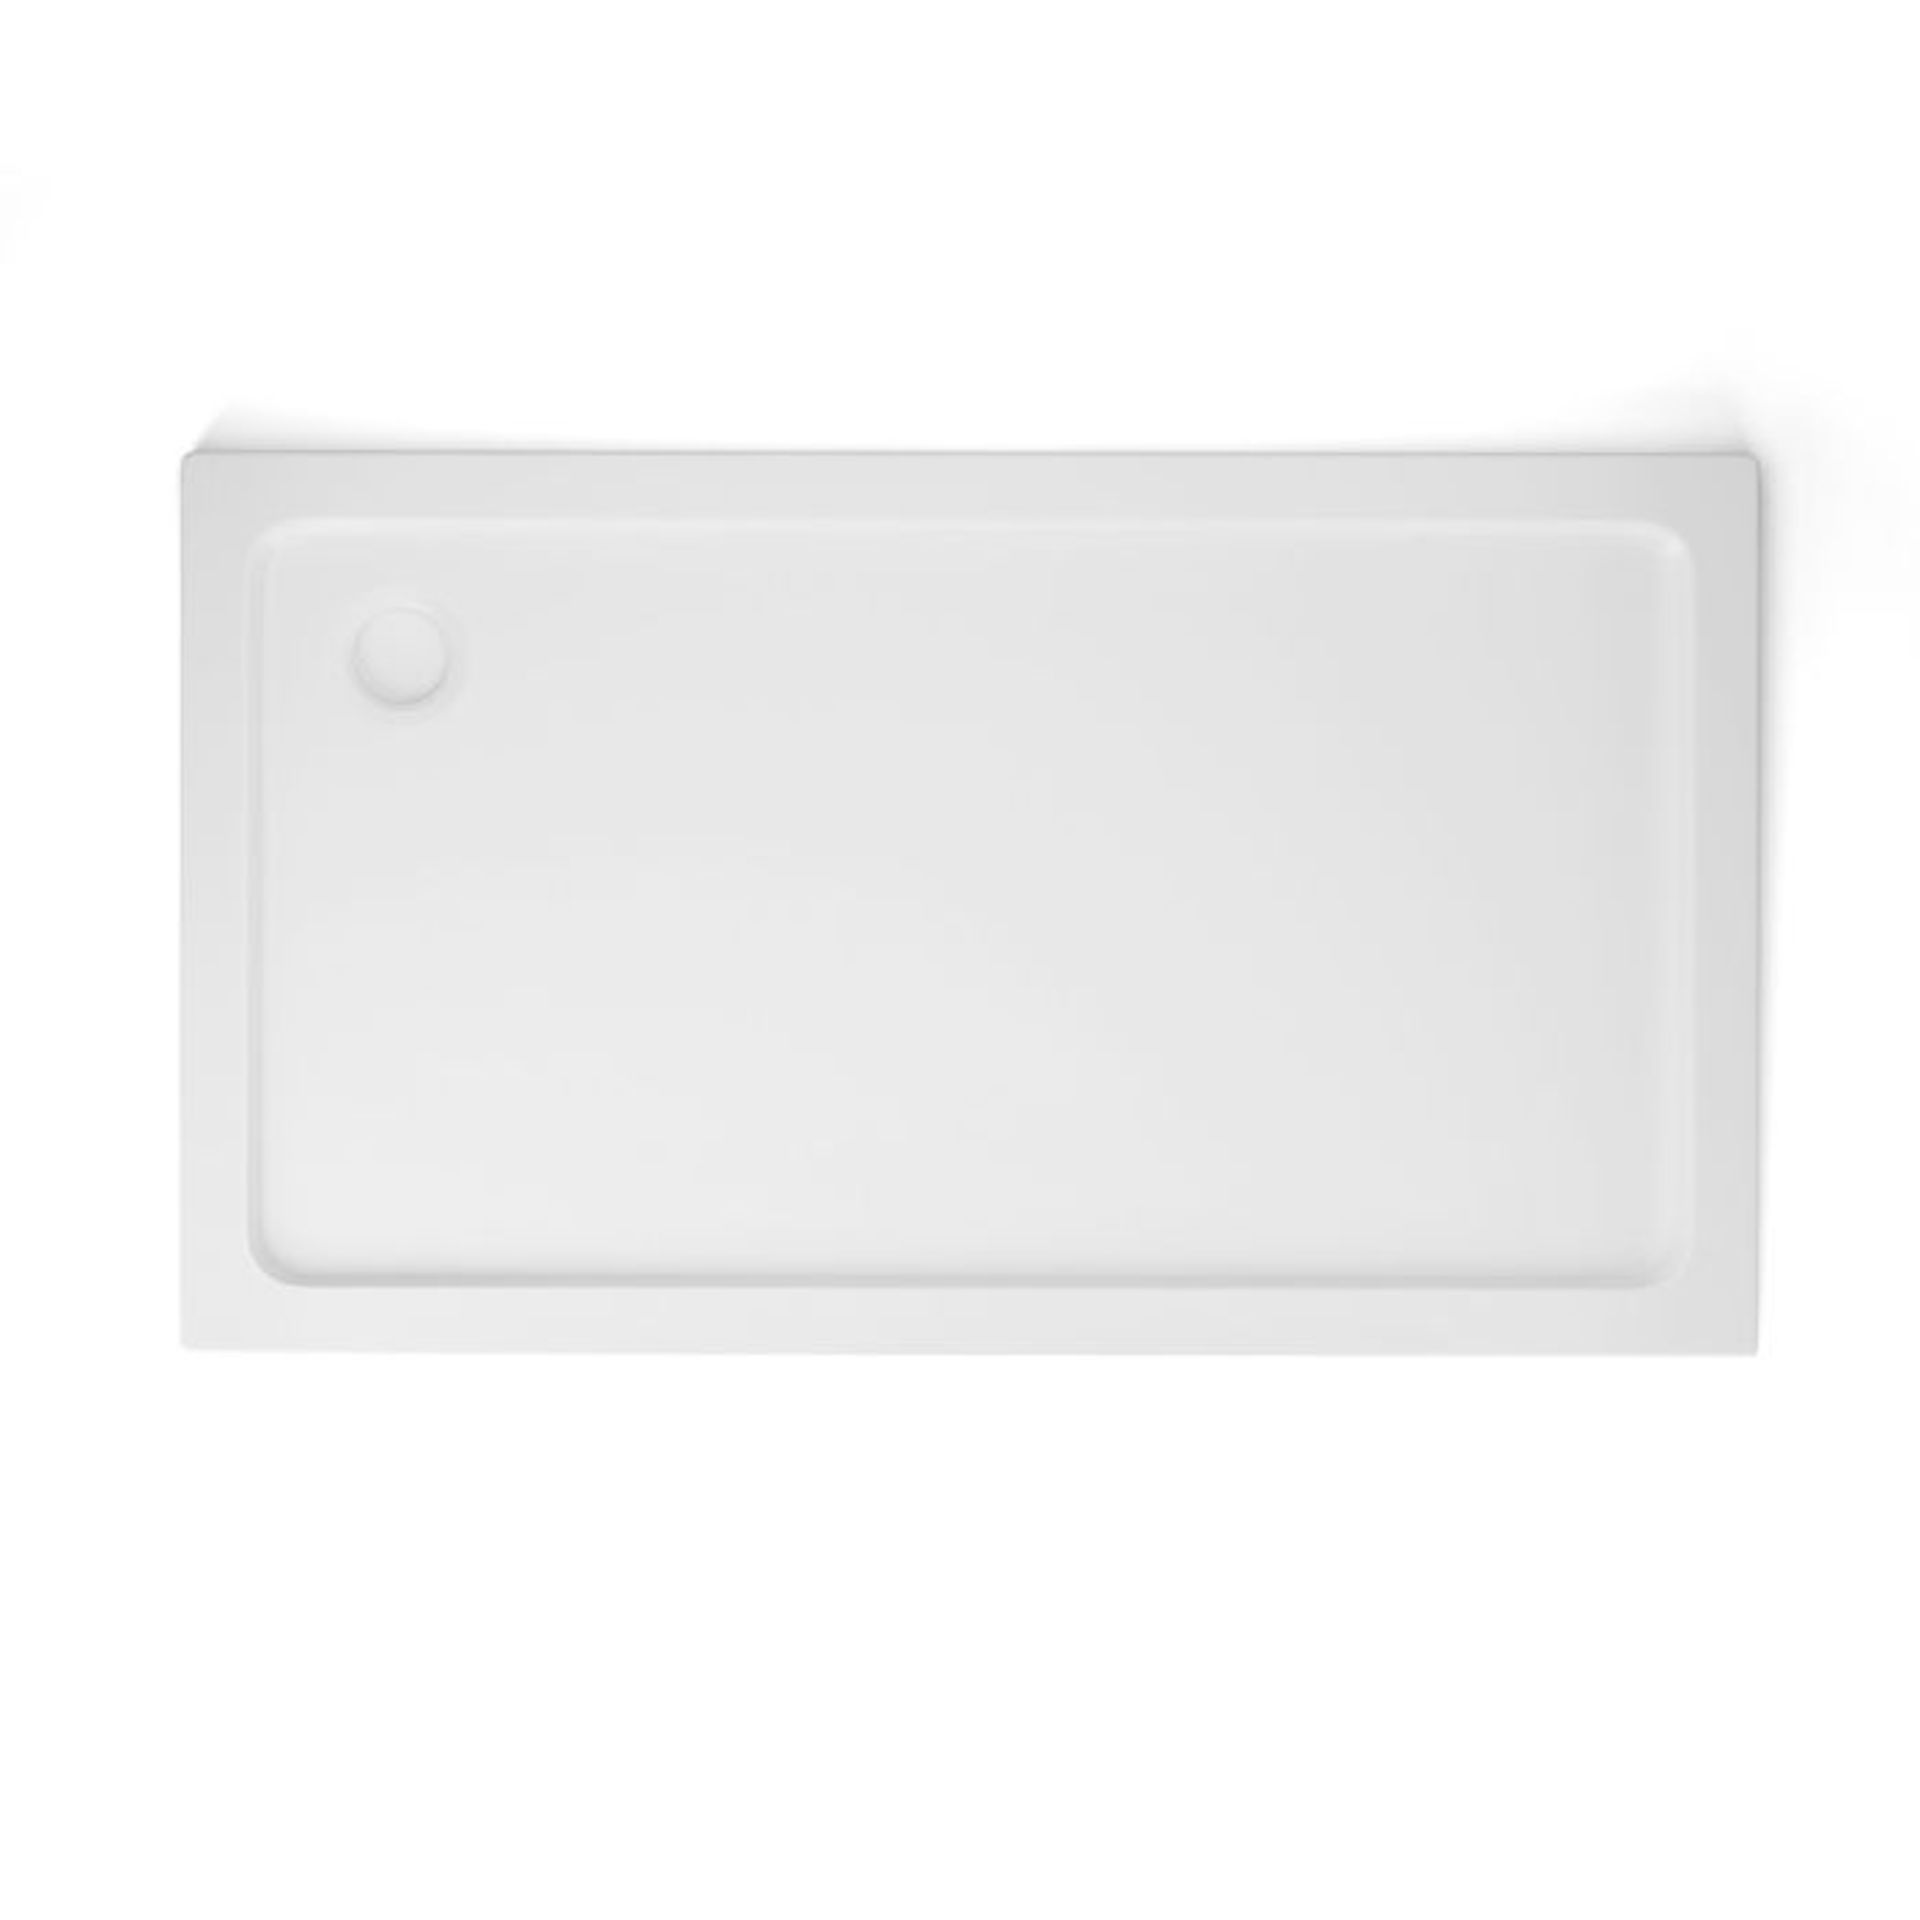 NEW (F88) 1300x800mm Rectangular Ultra Slim Stone Shower Tray. Constructed from acrylic capped ...